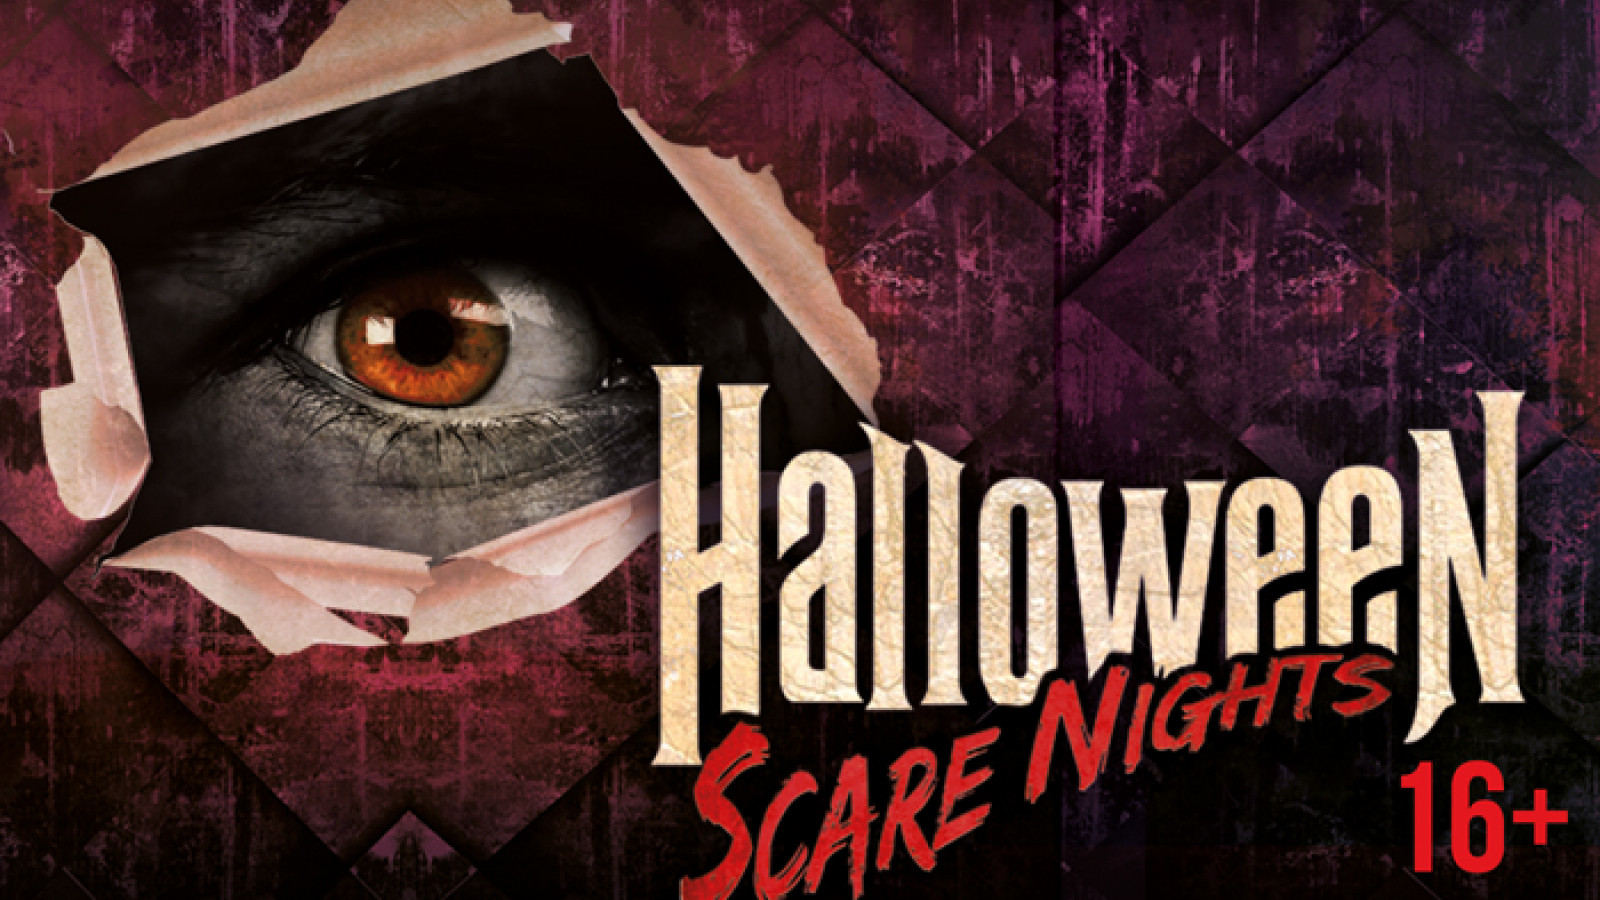 PDP_Scare-Nights_Website_700x471